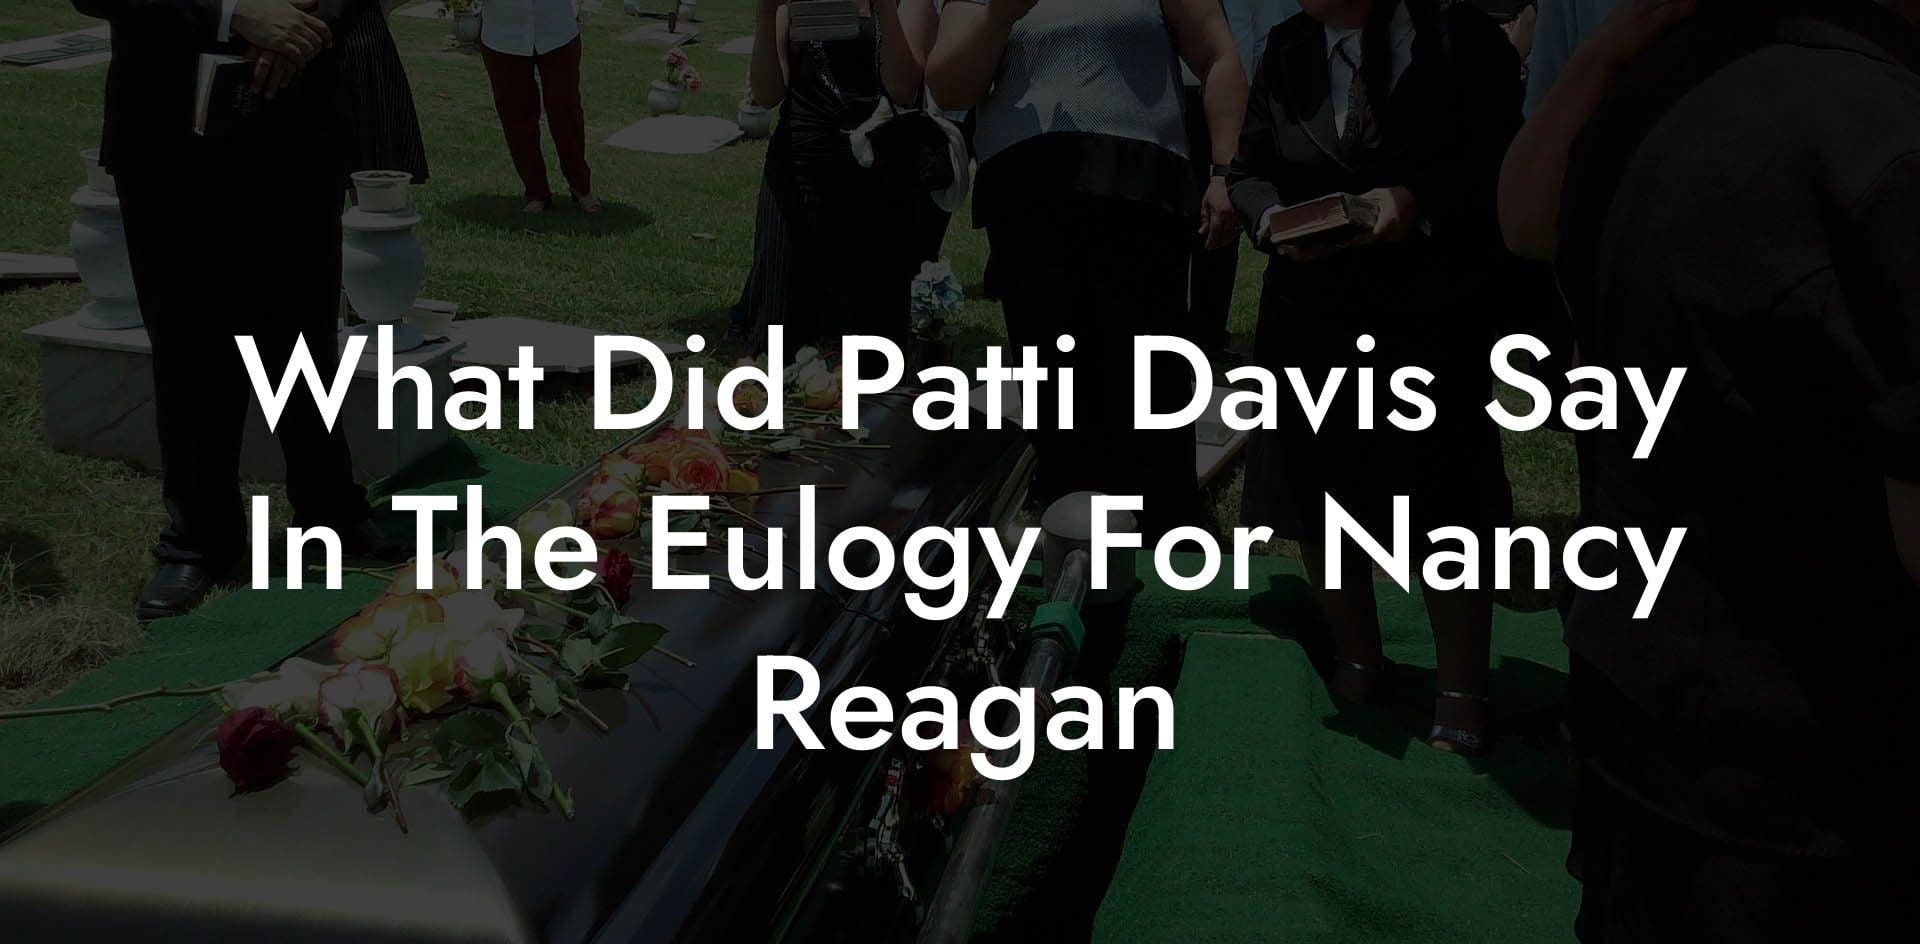 What Did Patti Davis Say In The Eulogy For Nancy Reagan